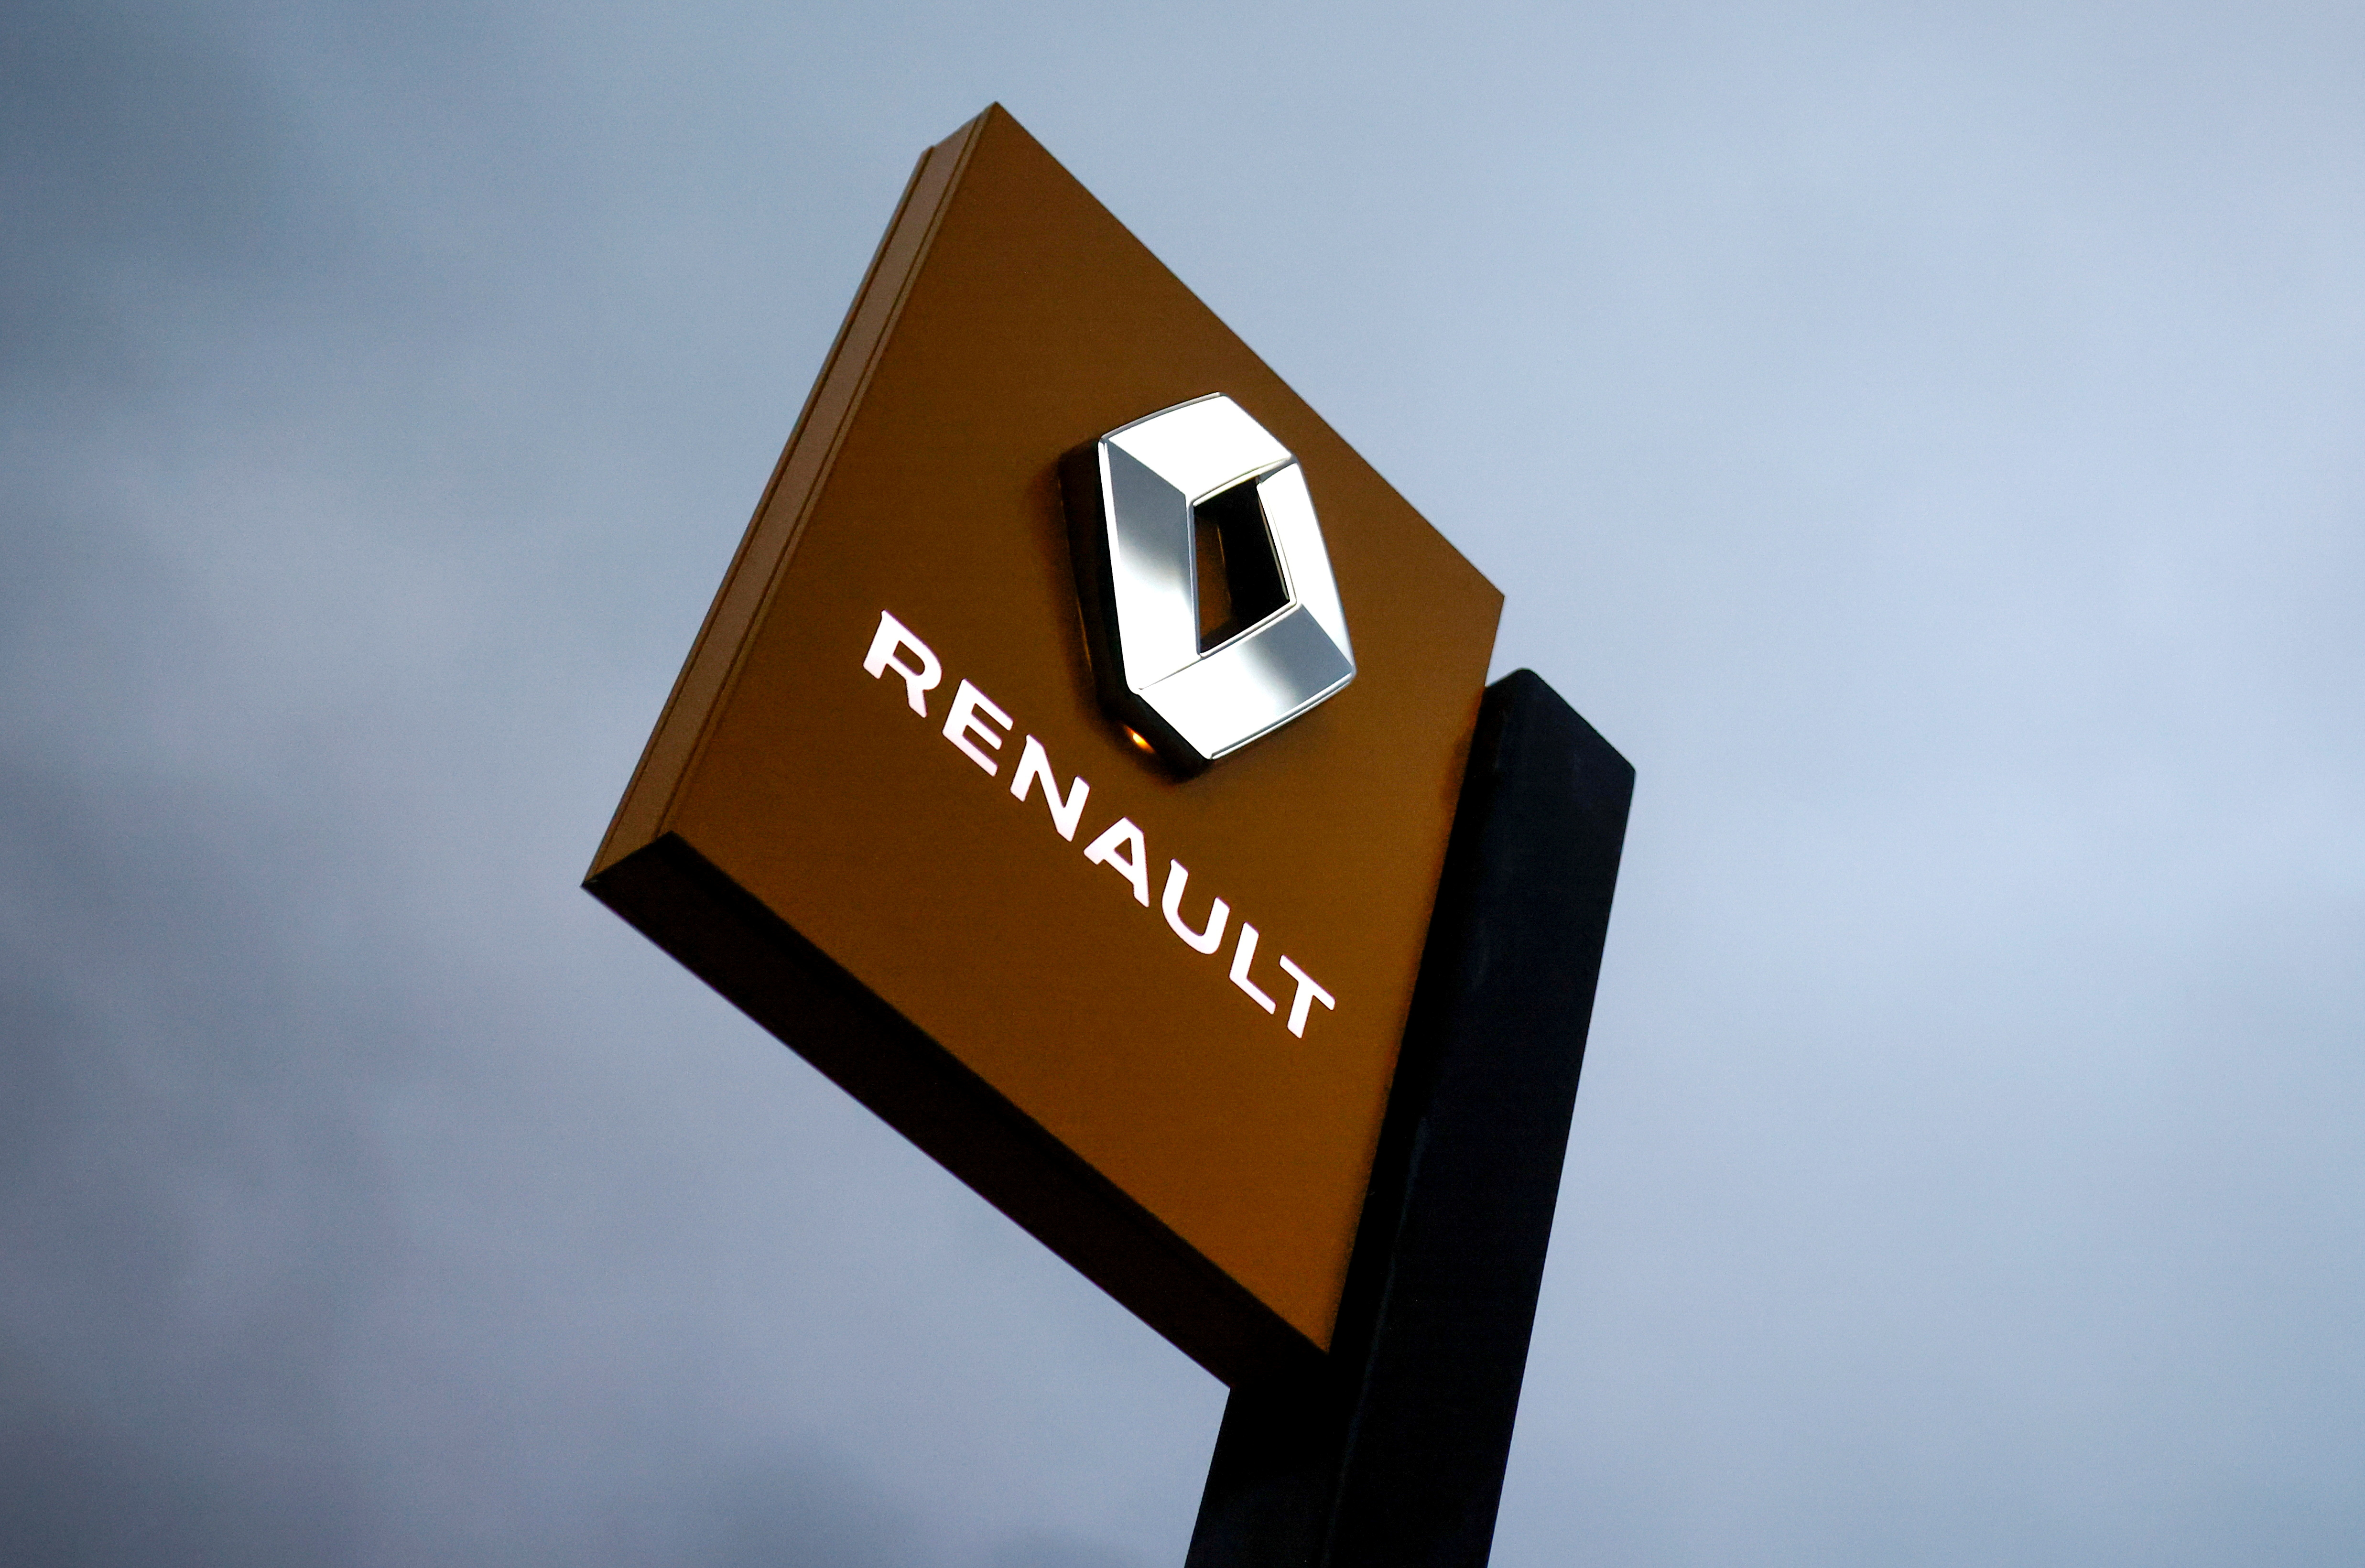 The logo of carmaker Renault is pictured at a dealership in France